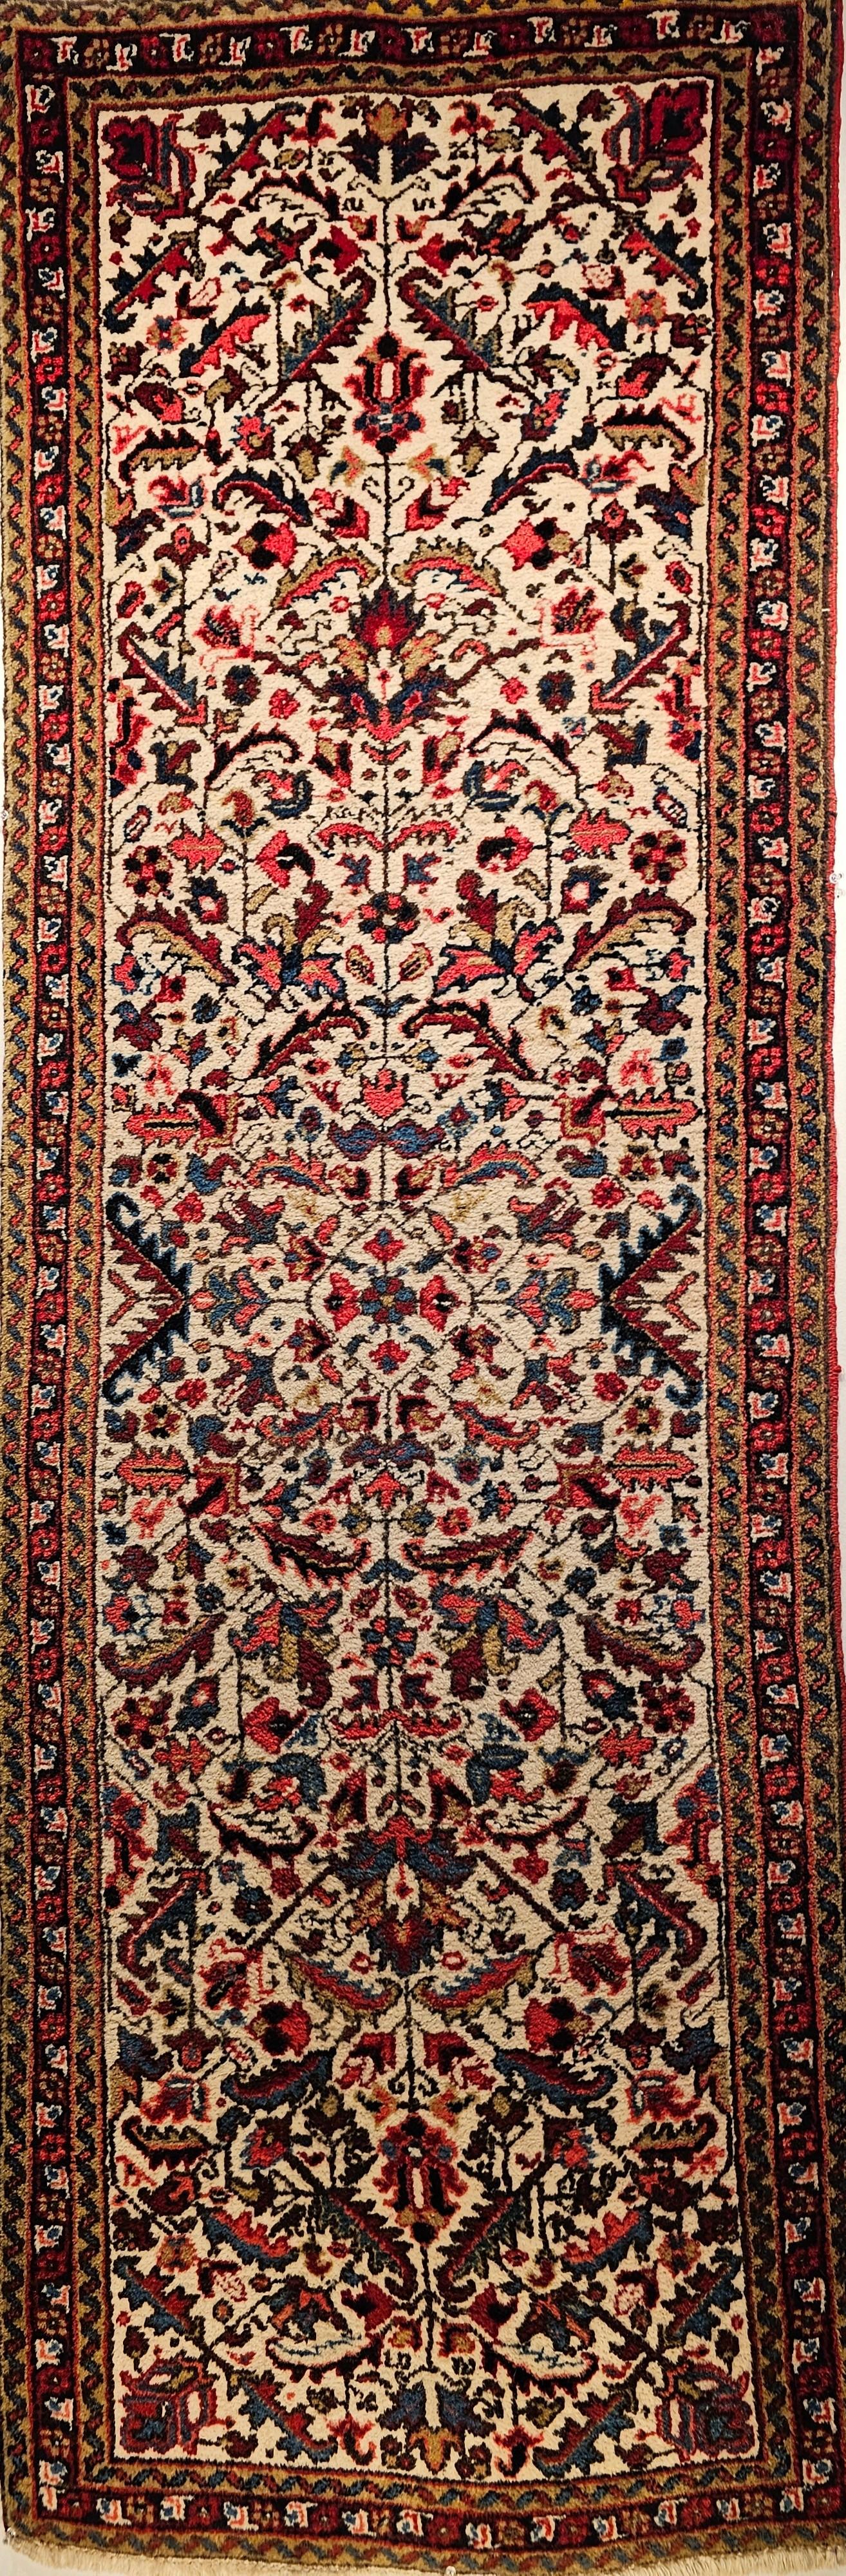  Vintage Persian Heriz runner in an allover geometric pattern set on a very rare ivory color background.   This Heriz runner was woven in the second quarter of the 1900s.  It is very unique and extremely rare in having an allover design which is a